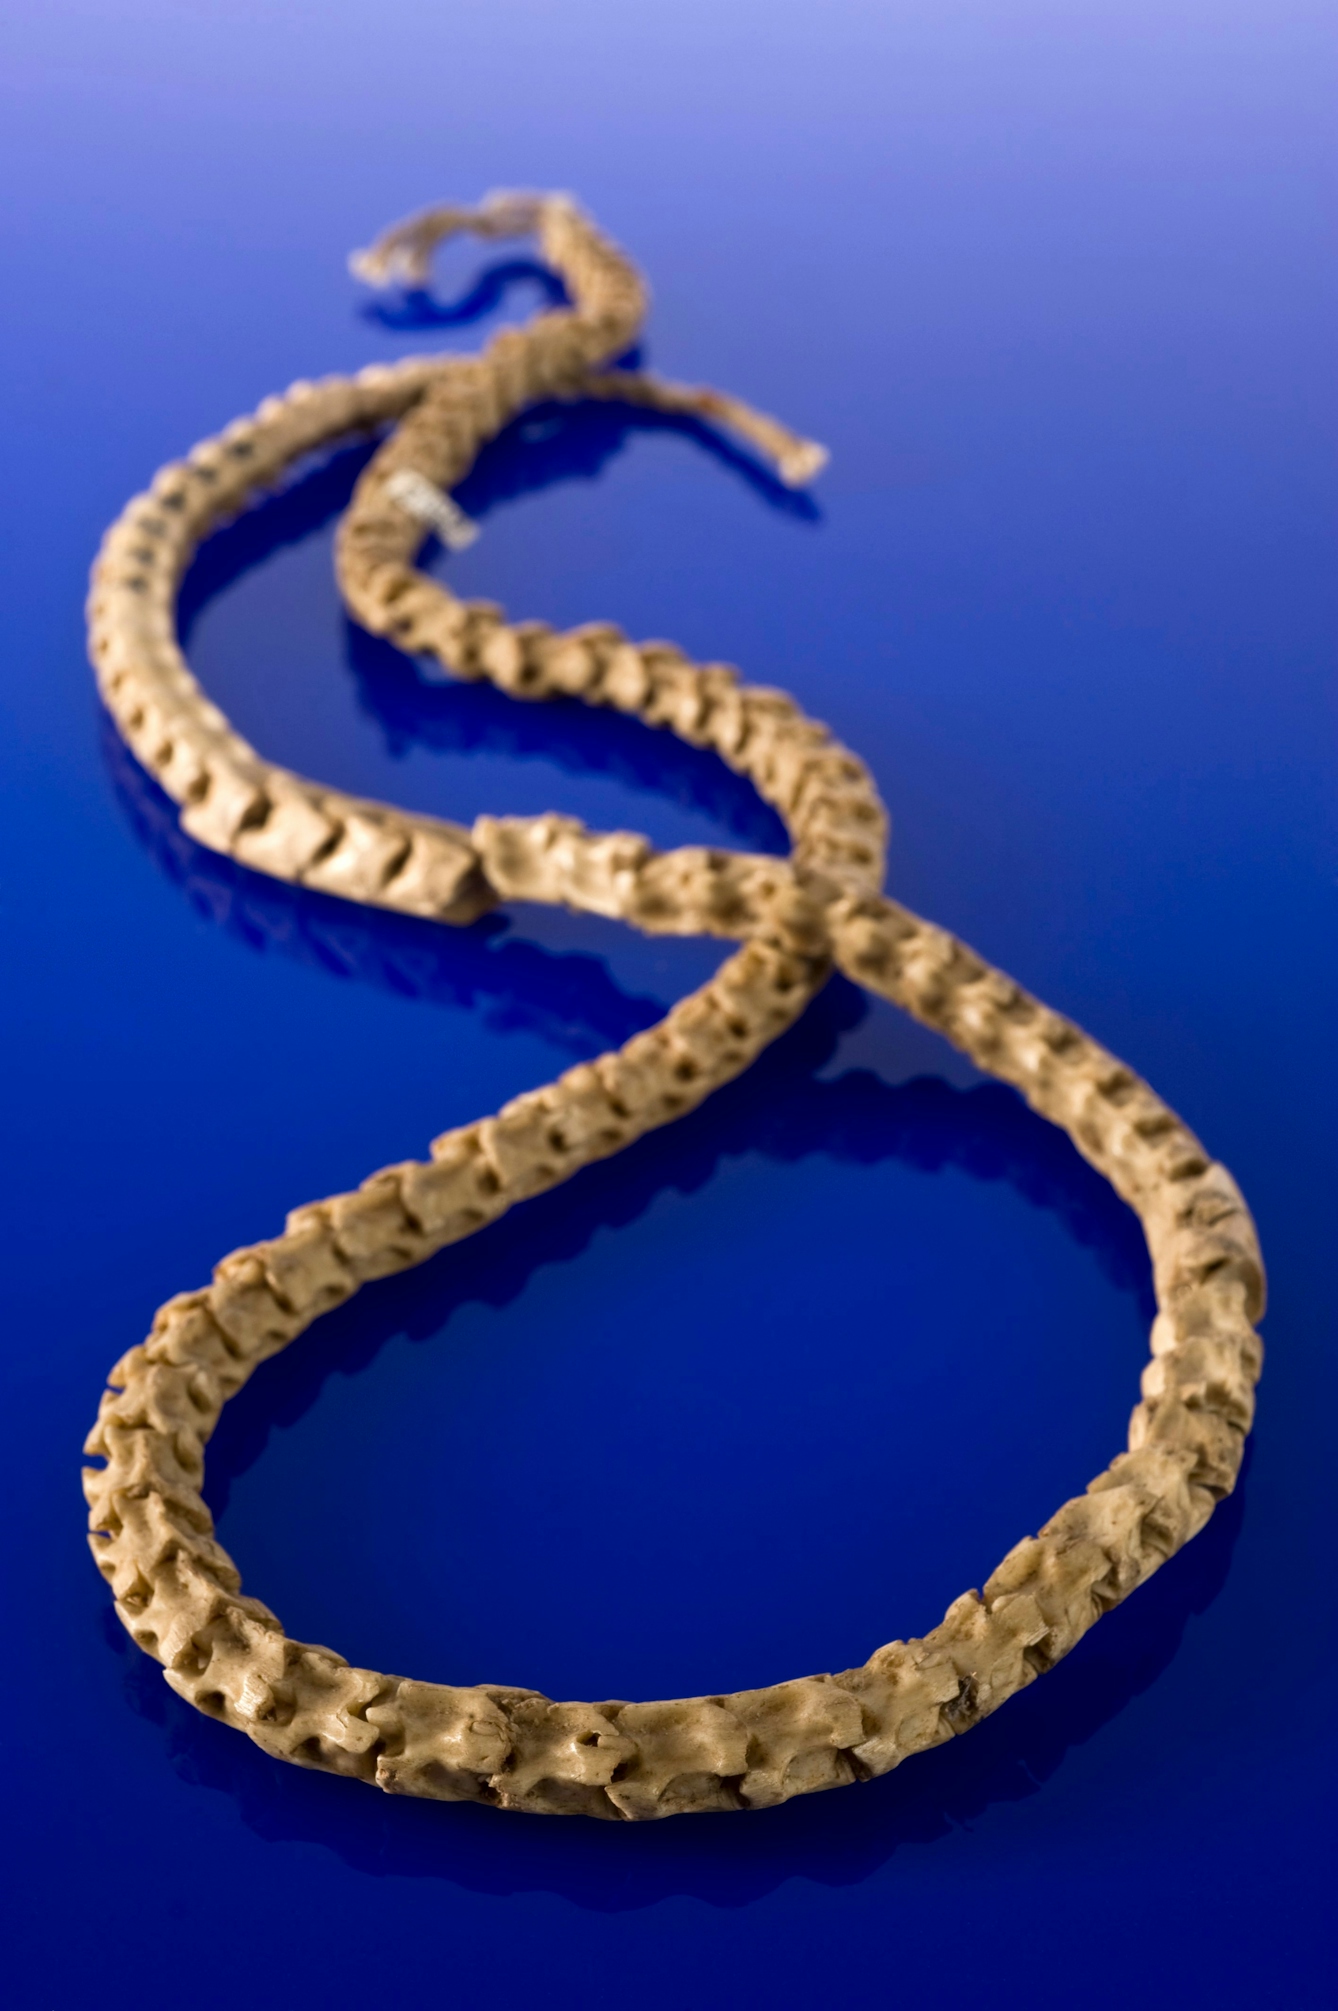 A bone necklace in a figure eight configuration on a blue background